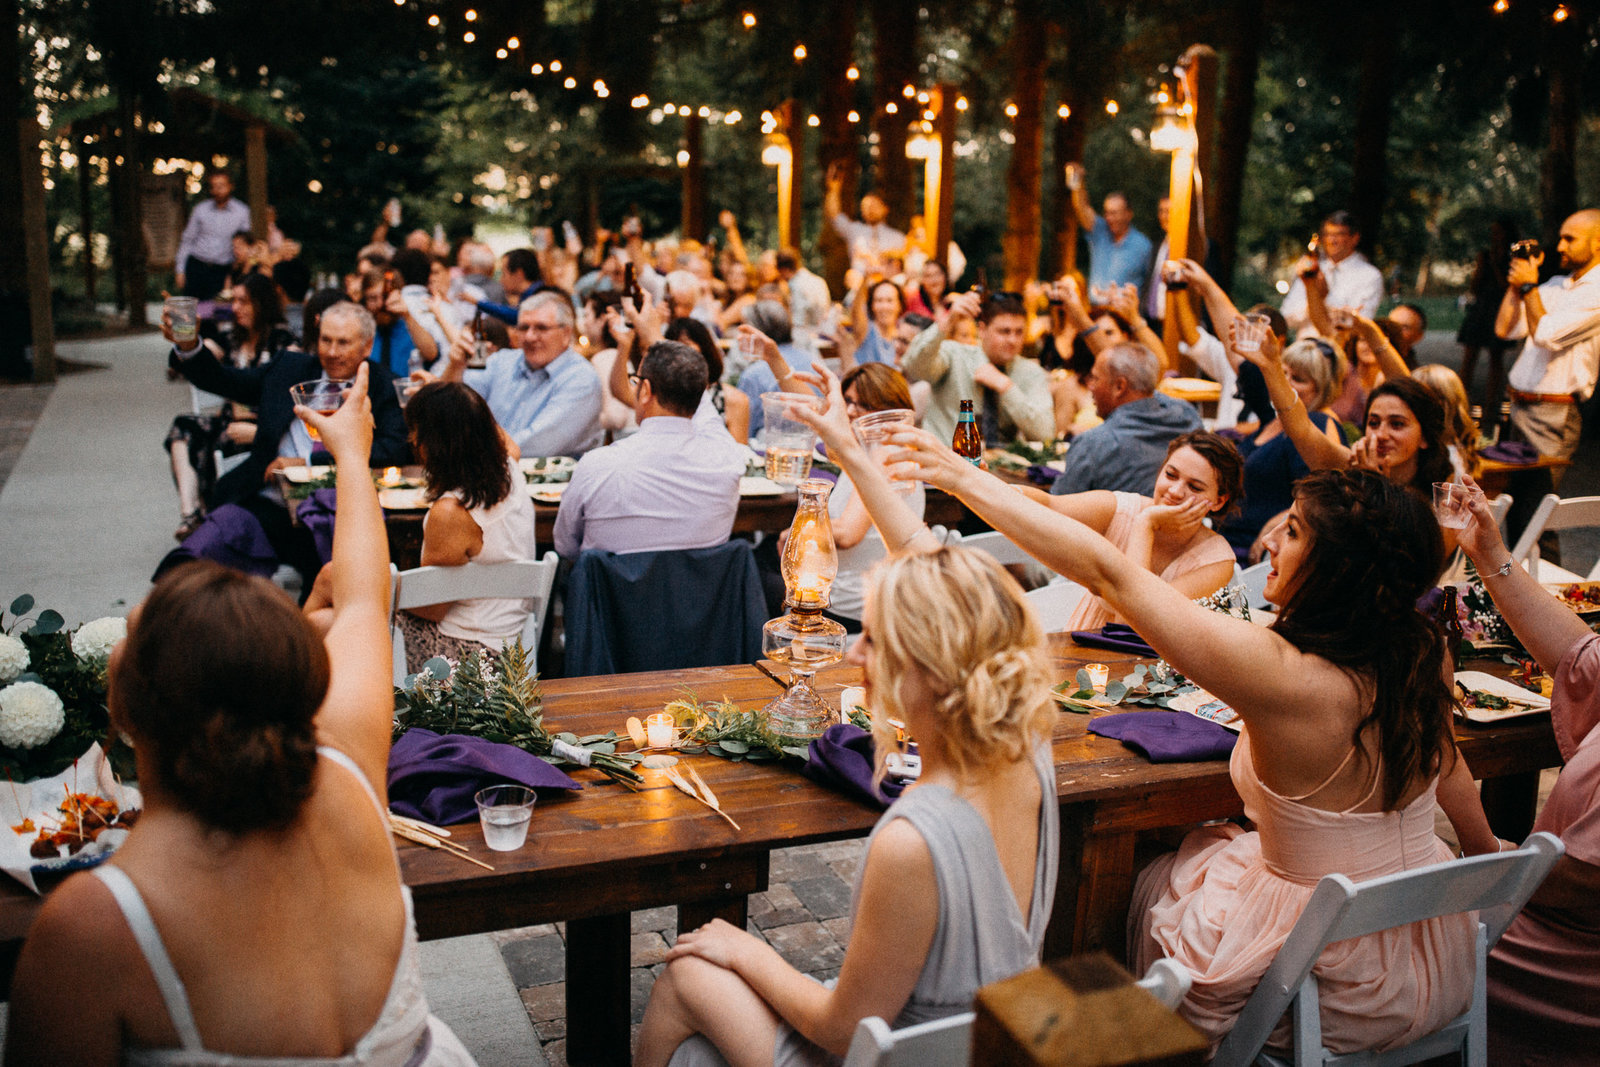 Wedding guests toasting the bride groom at an outdoor ceremony.